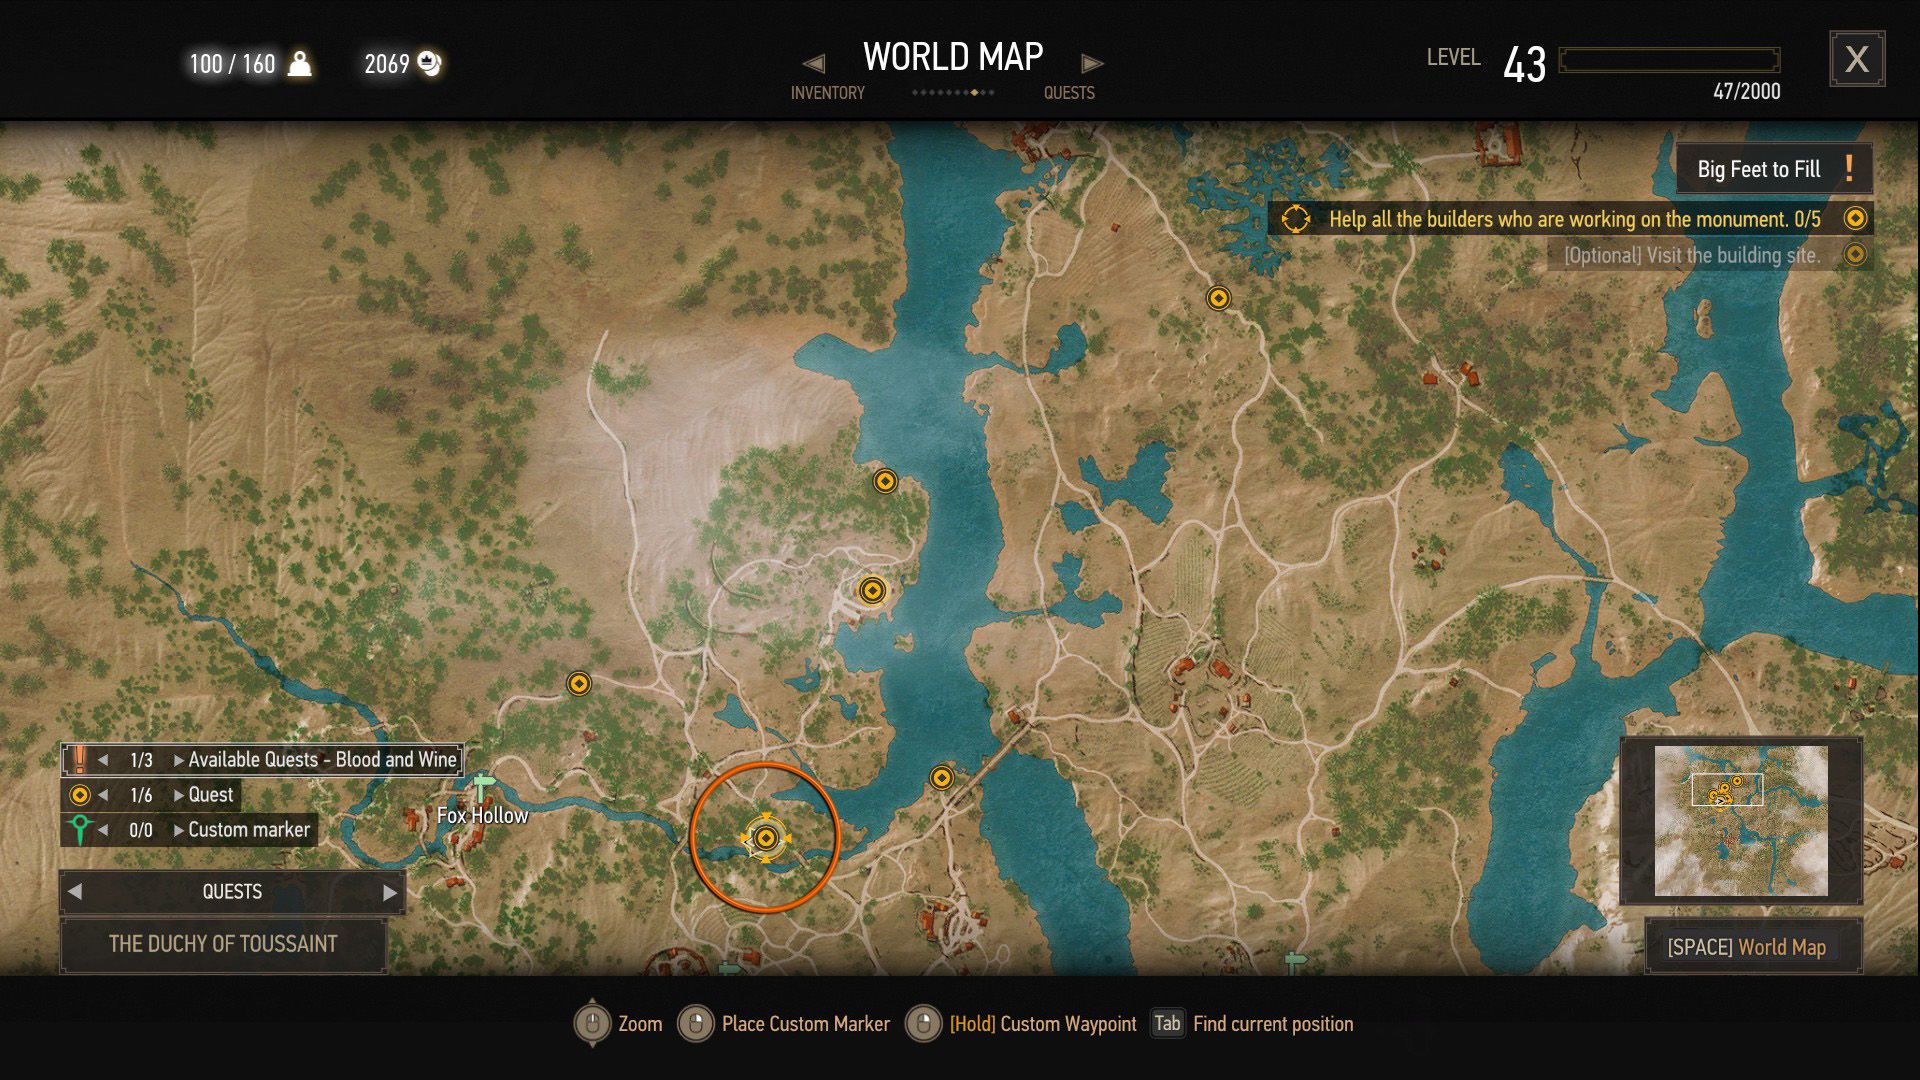 A screenshot of The Witcher 3 map with an orange circle above the quest objective.